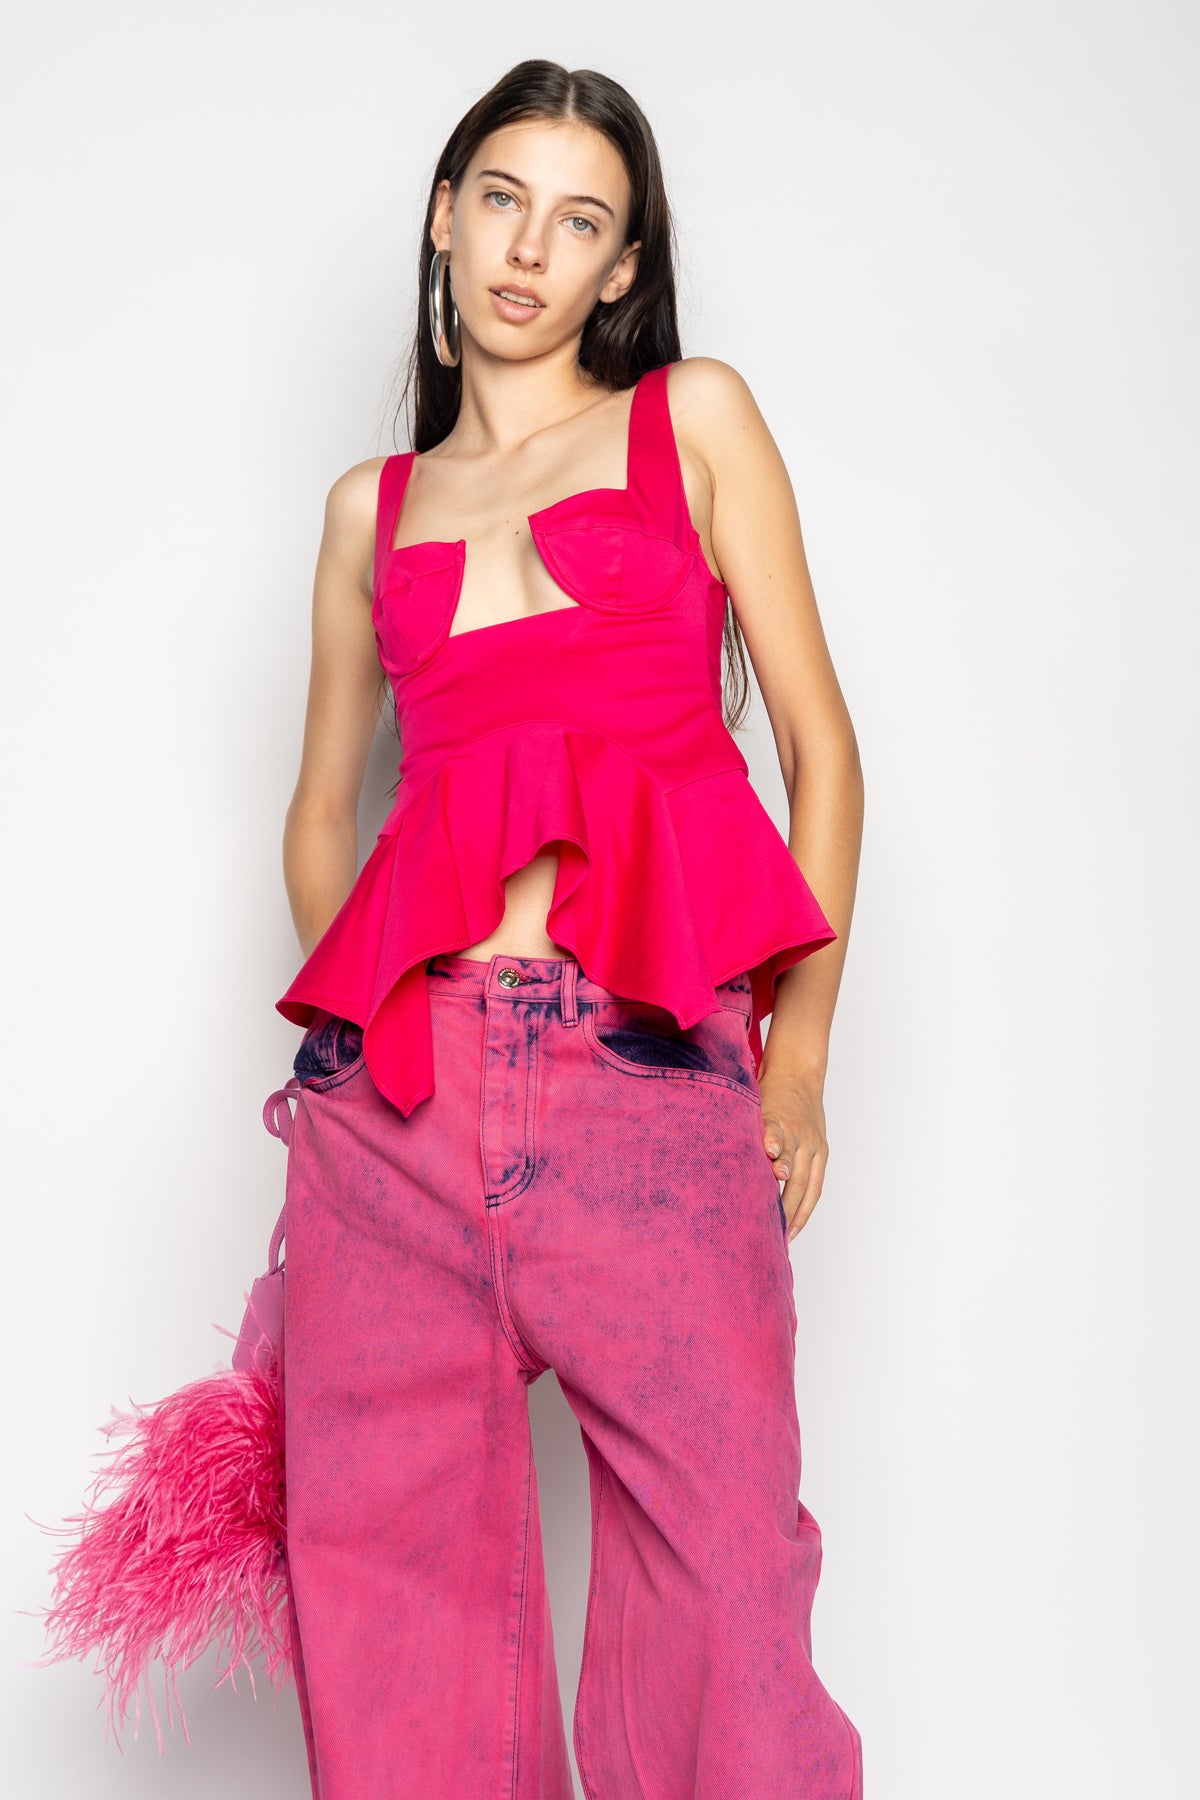 PINK STRAP CORSET WITH WAIST FLOUNCE marques almeida